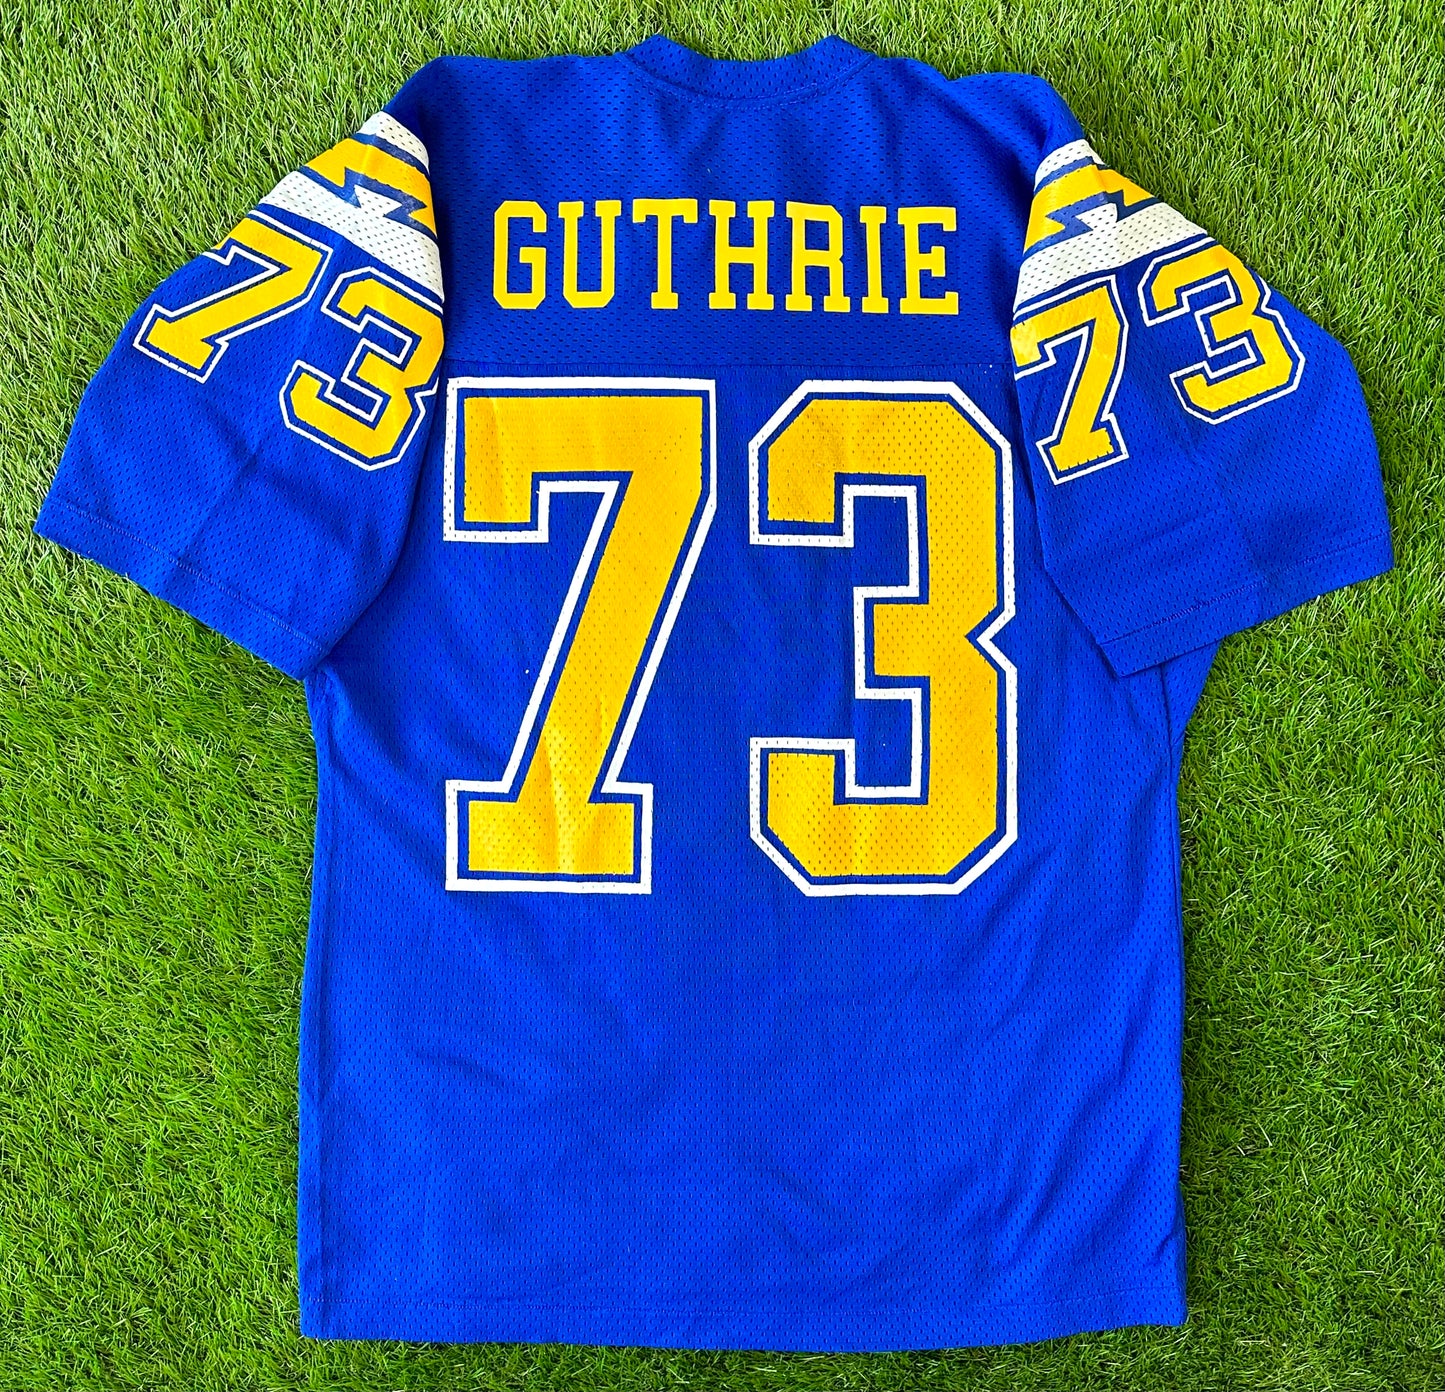 San Diego Chargers 1984 Keith Guthrie NFL Football Jersey (Large)